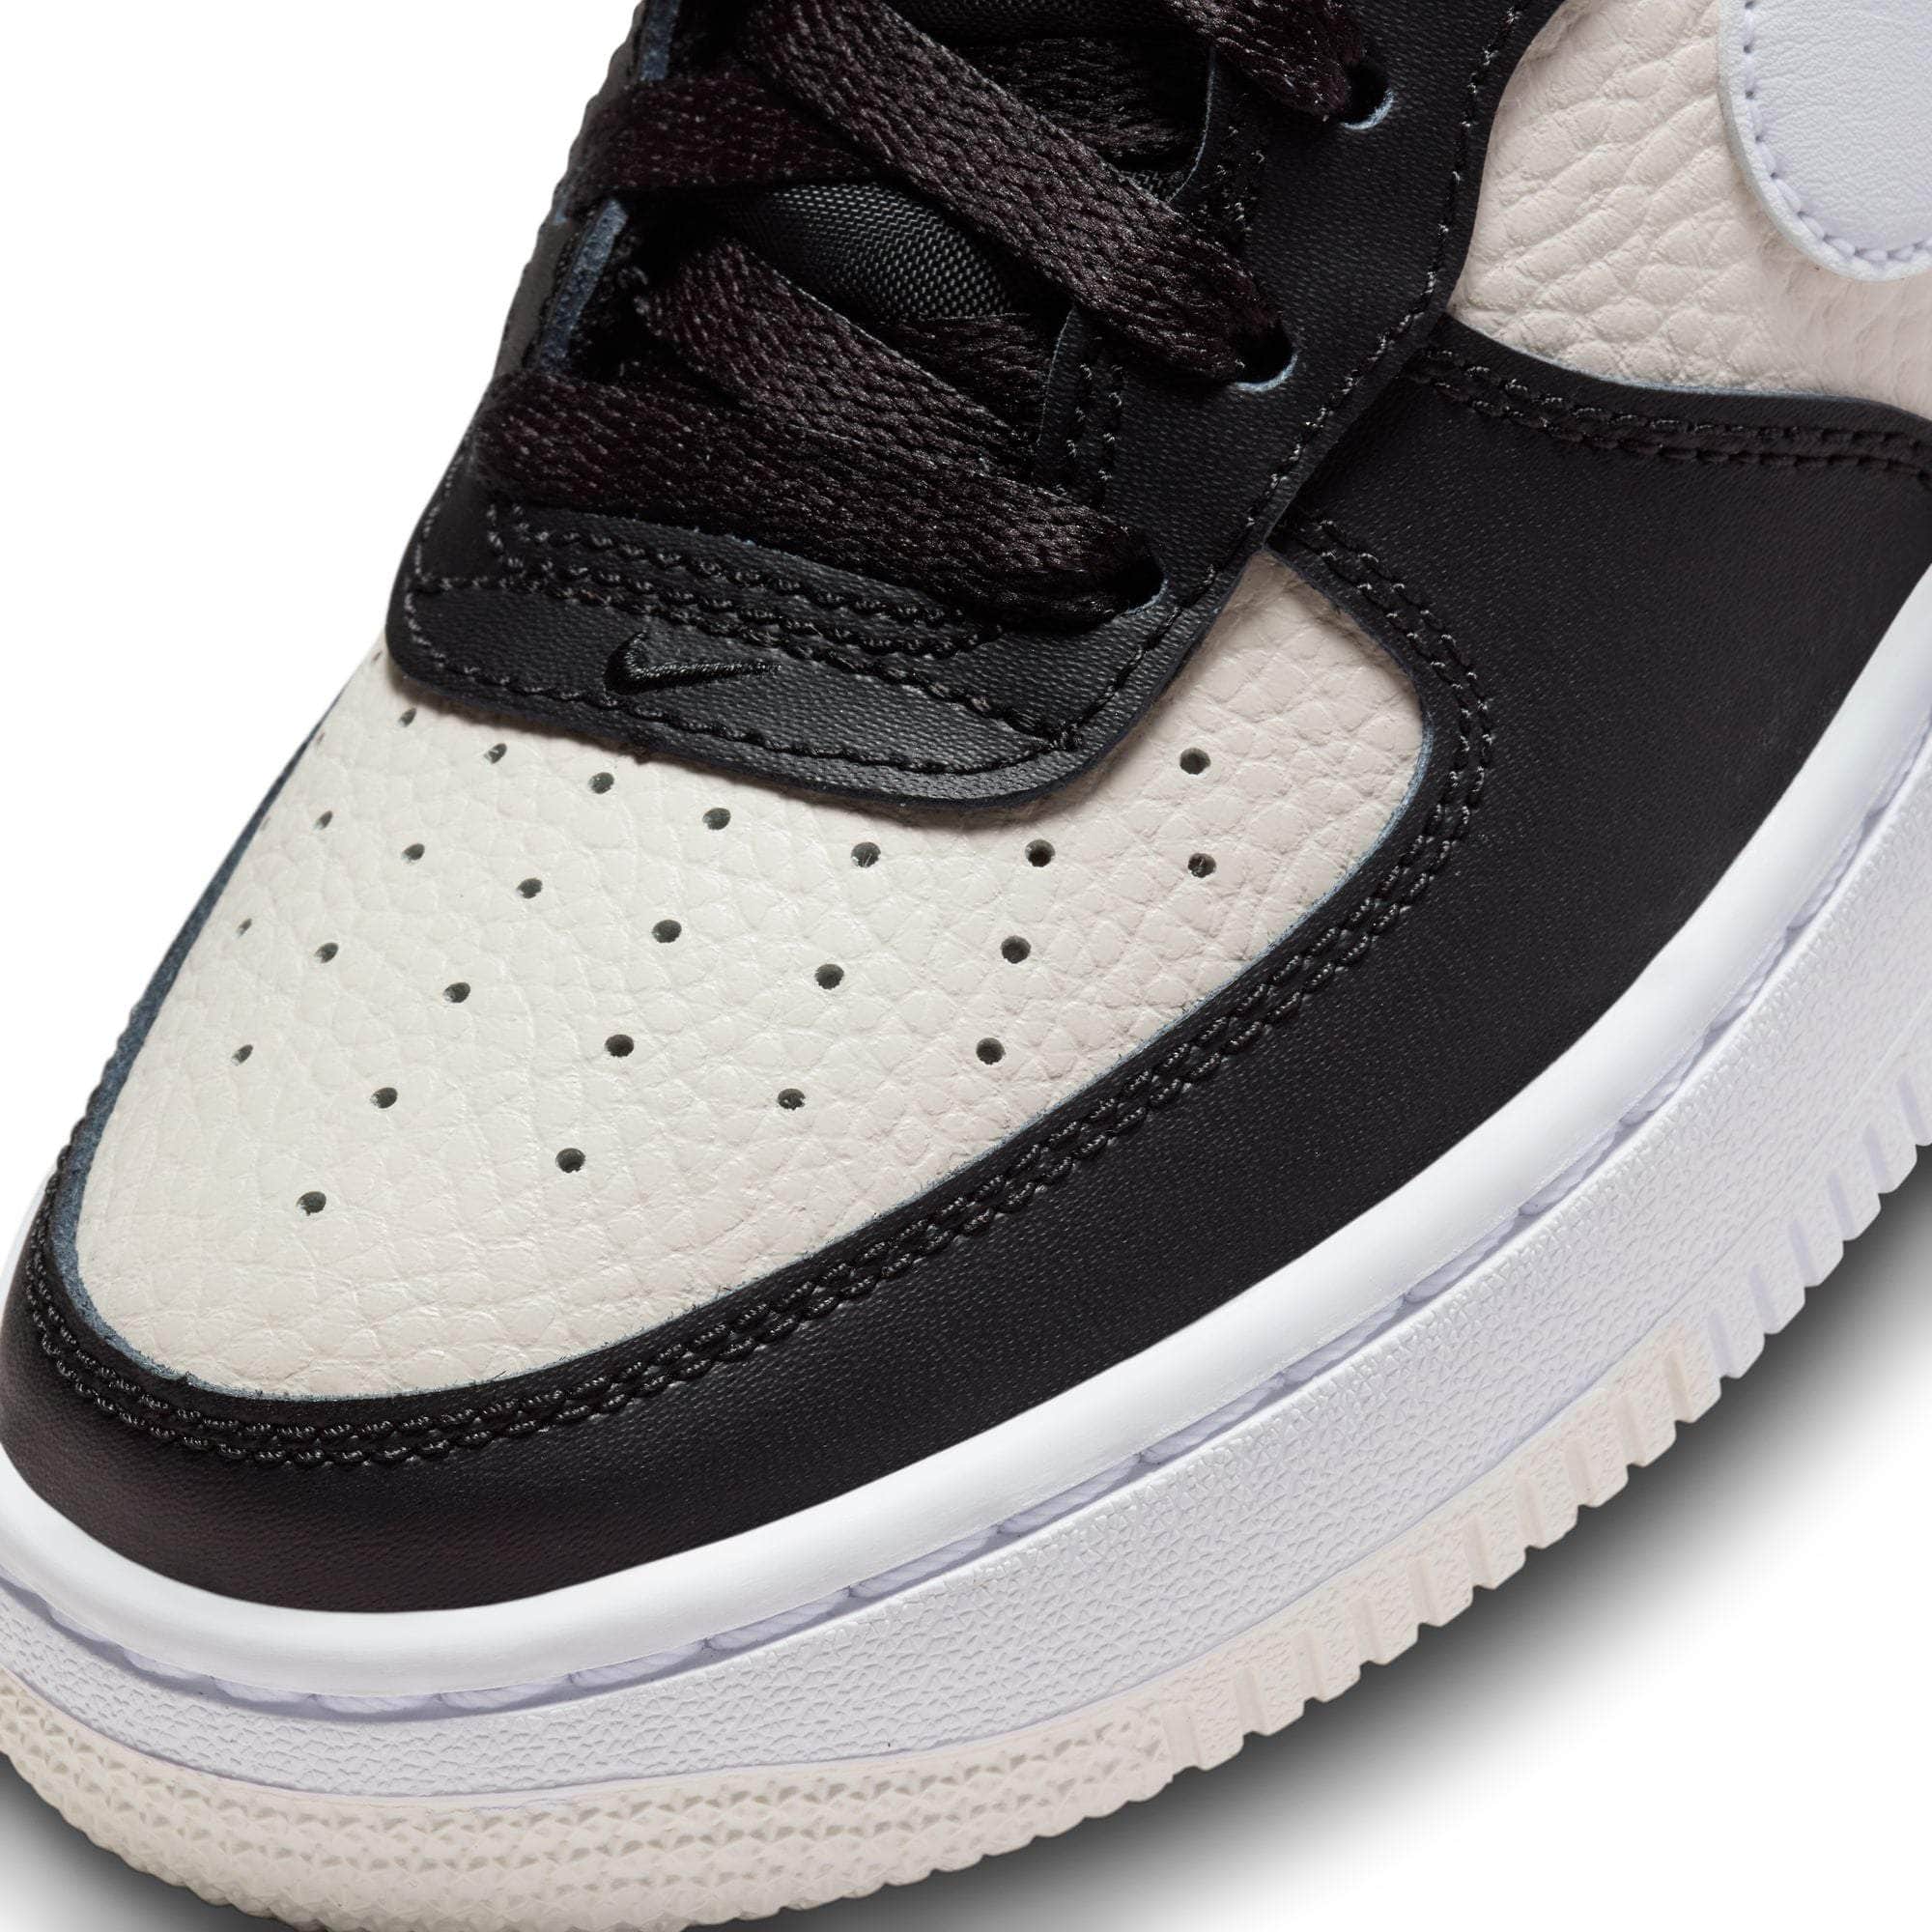 Nike Air Force 1 LV8 (GS) in White - Size 5